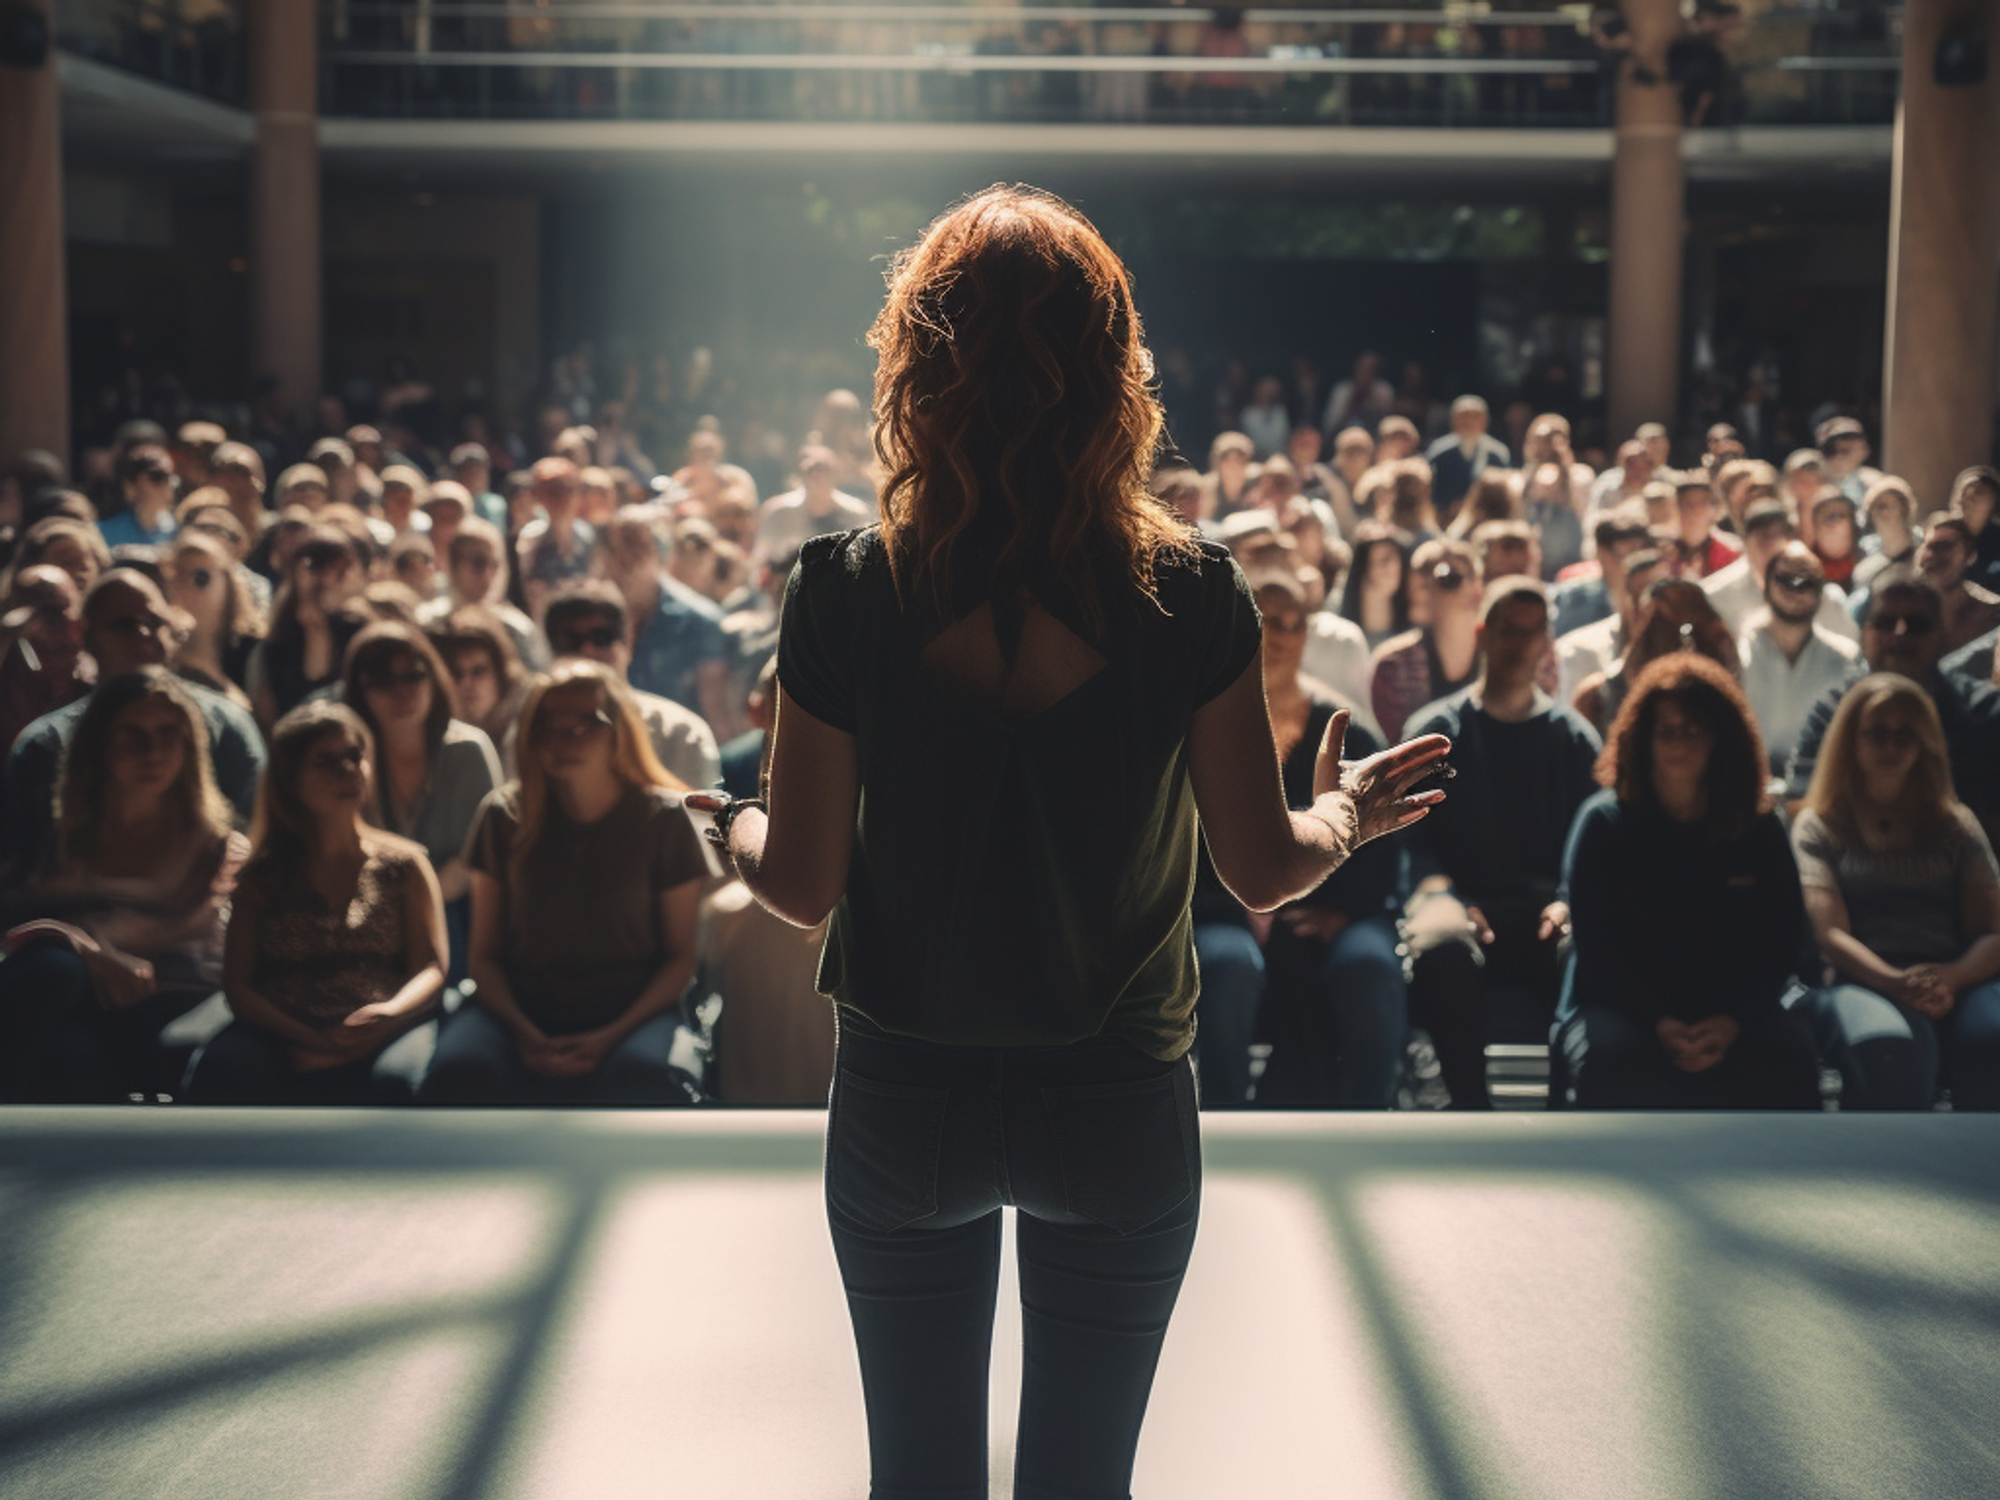 Woman overcomes stage fright and fear of public speaking and successfully gives a presentation